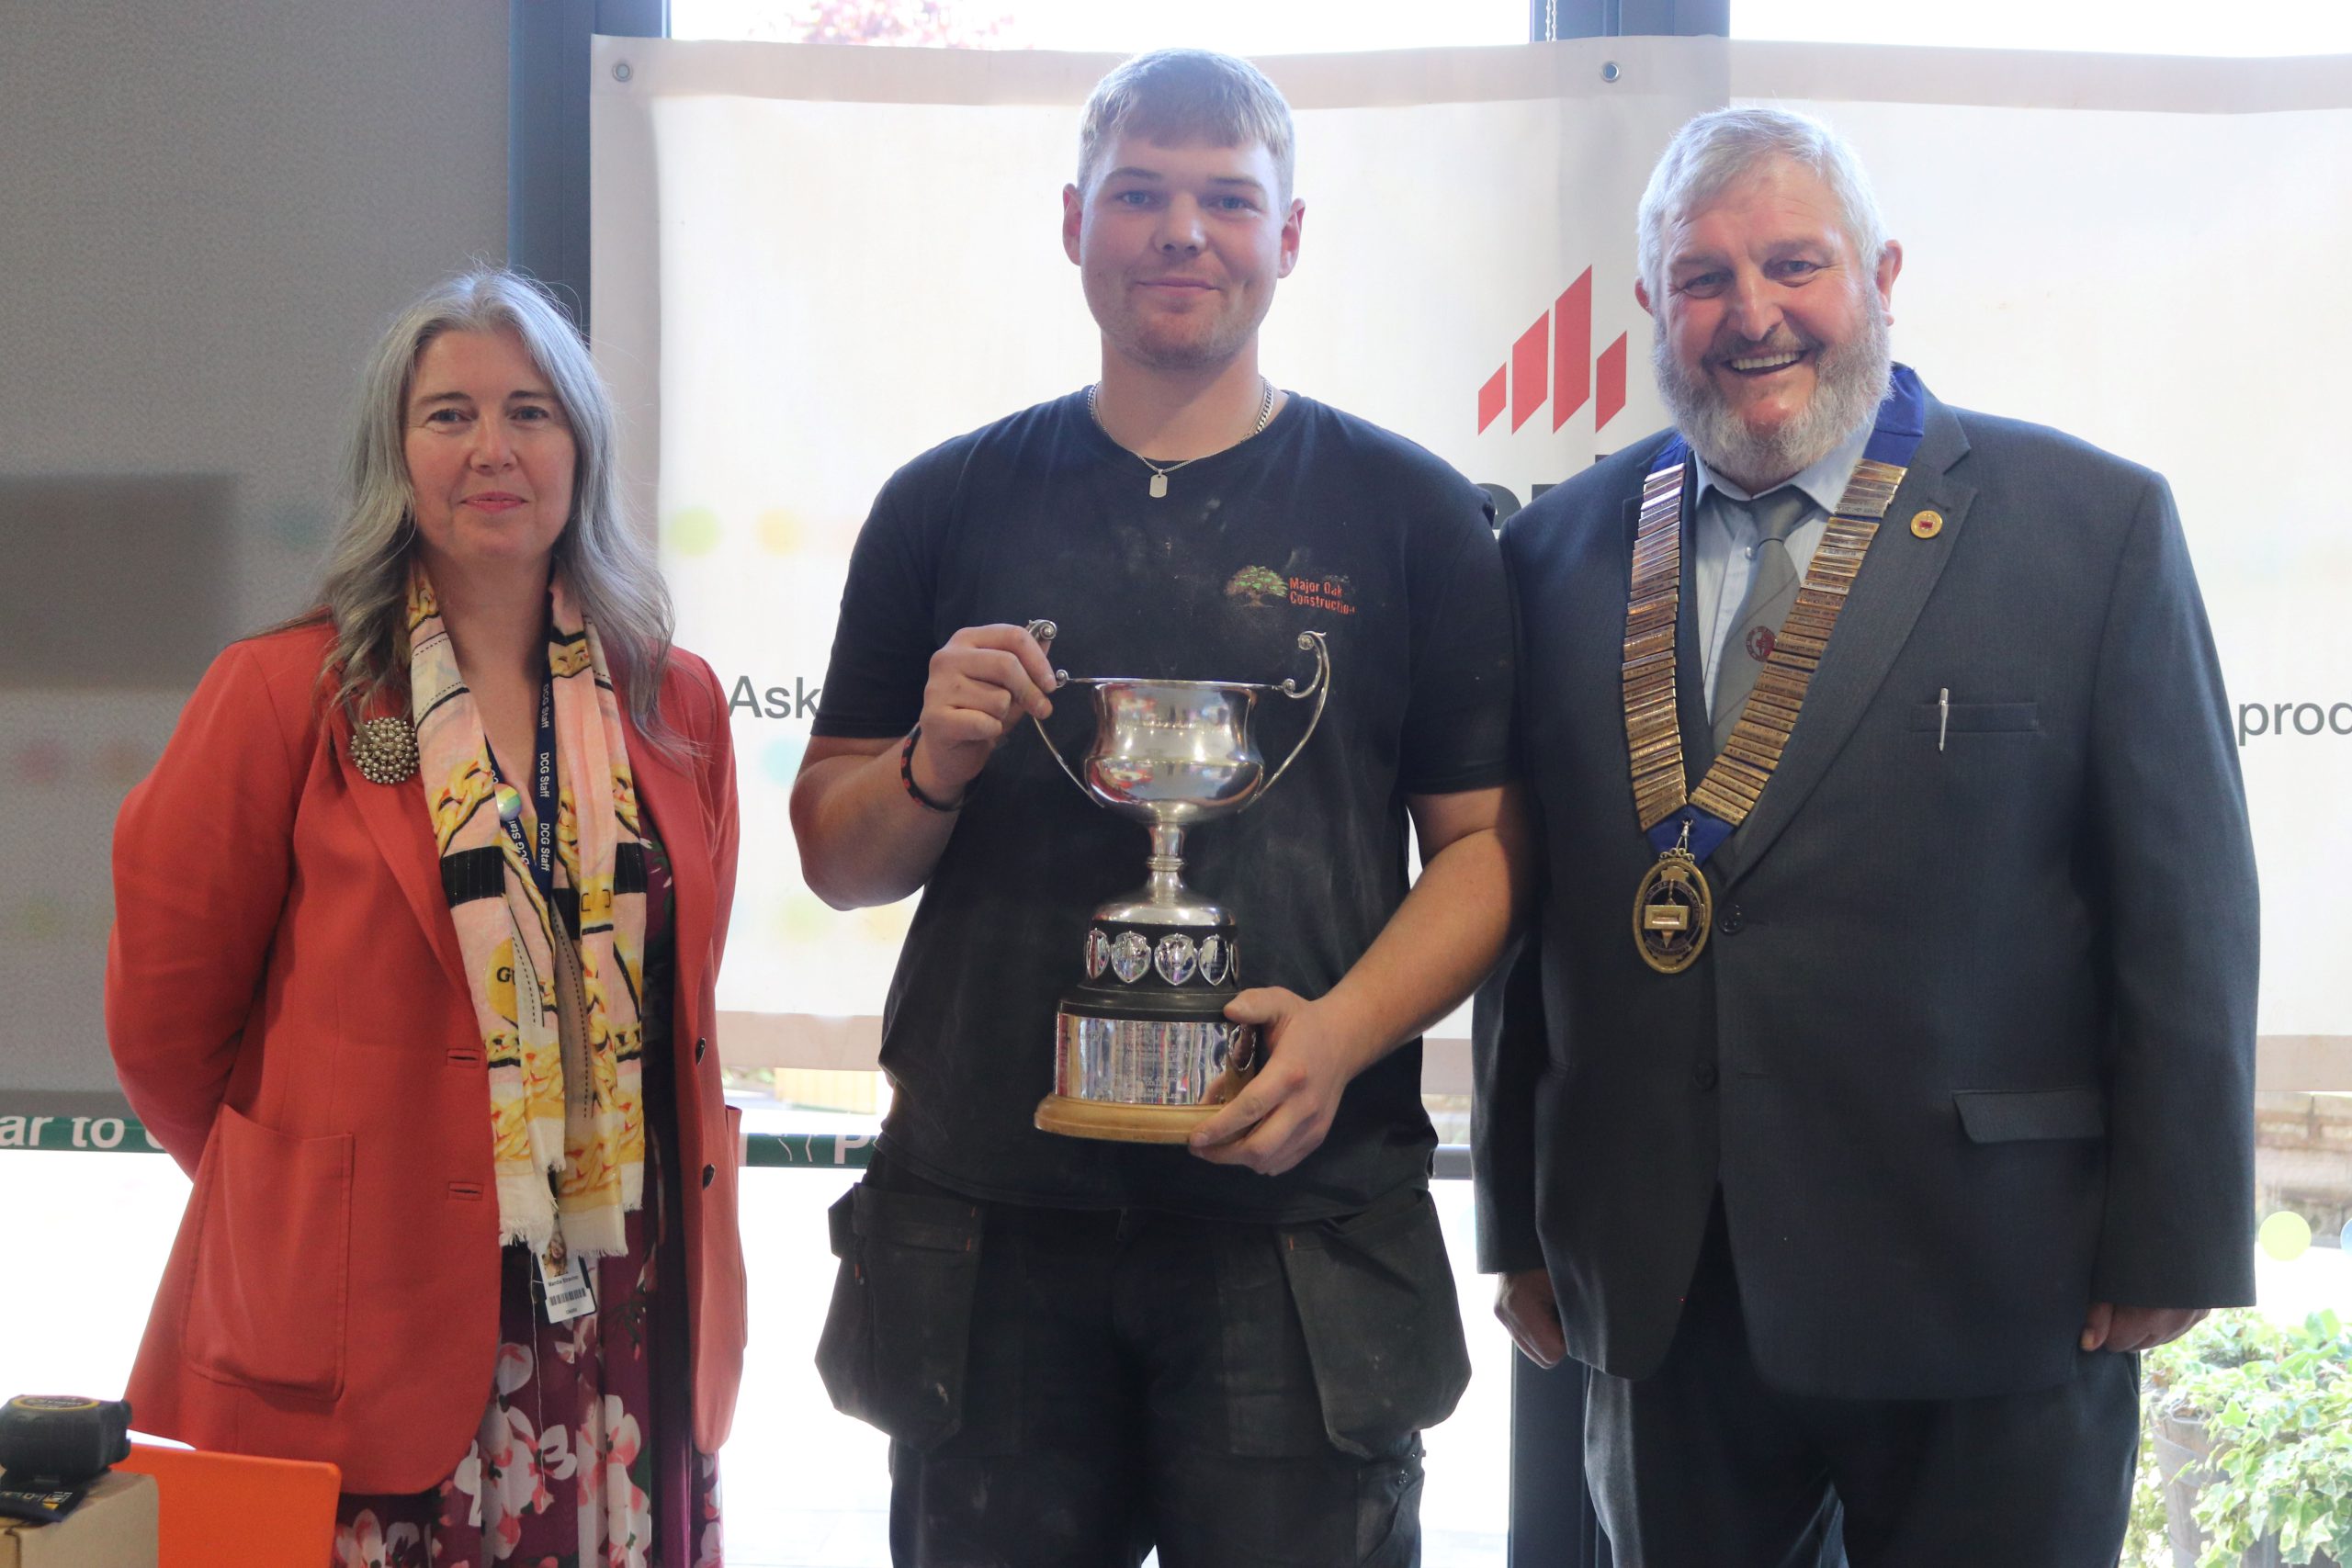 Senior Competition winner and DCG student, Matthew Wooley with DCG CEO Mandie Stravino OBE MBA and The Guild of Bricklayers President Mr Bill Bowmen